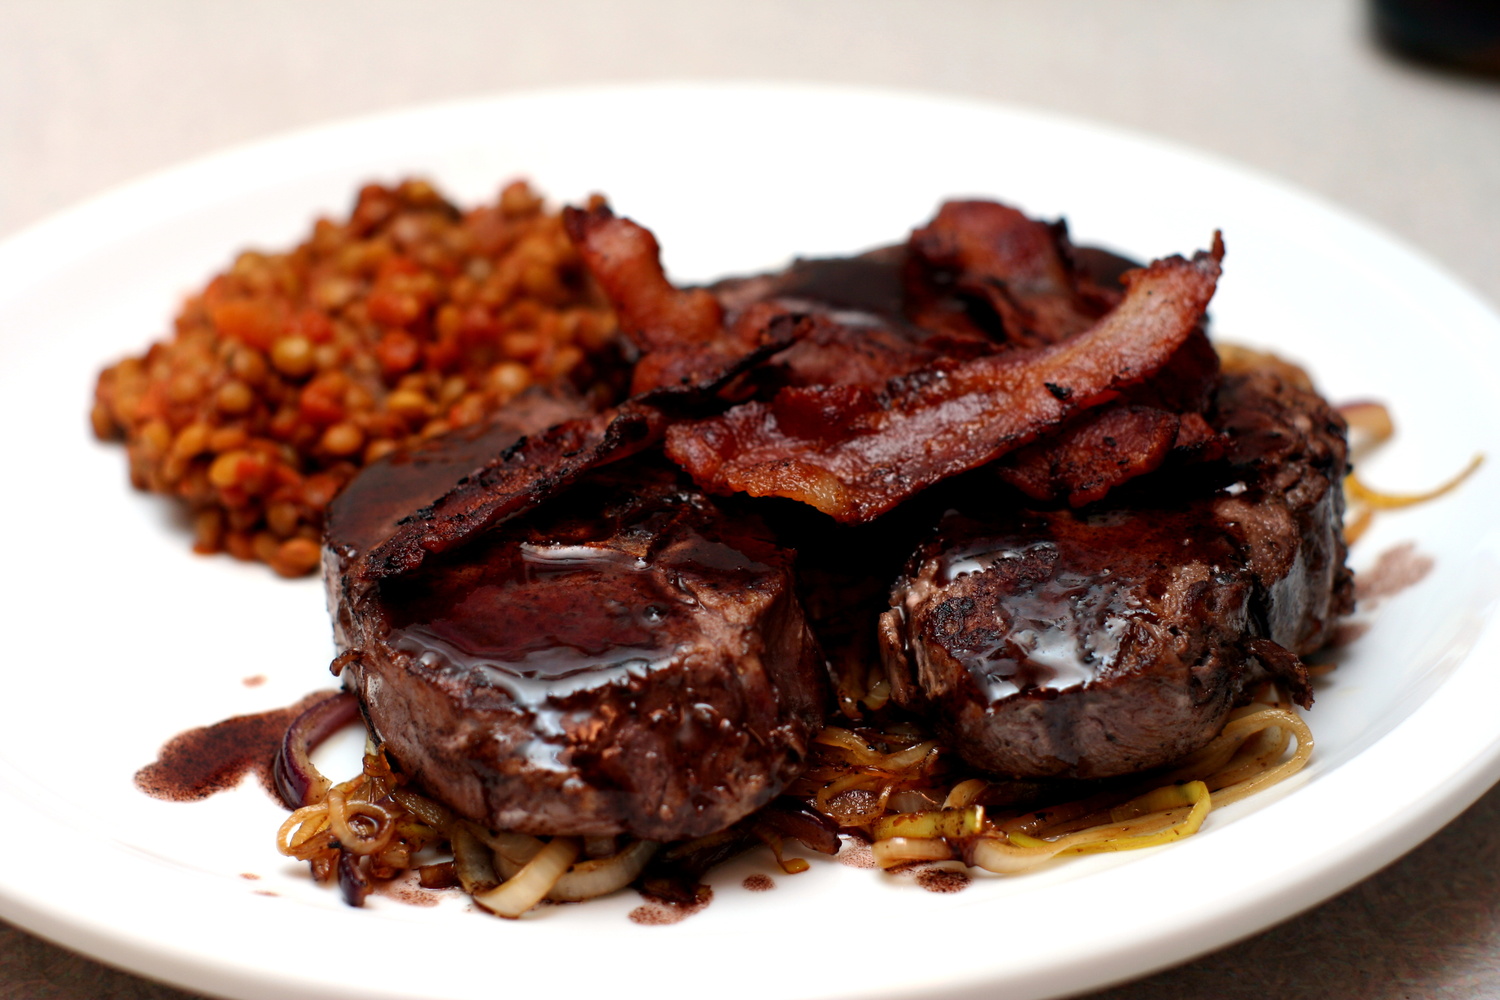 Fried deer with red wine